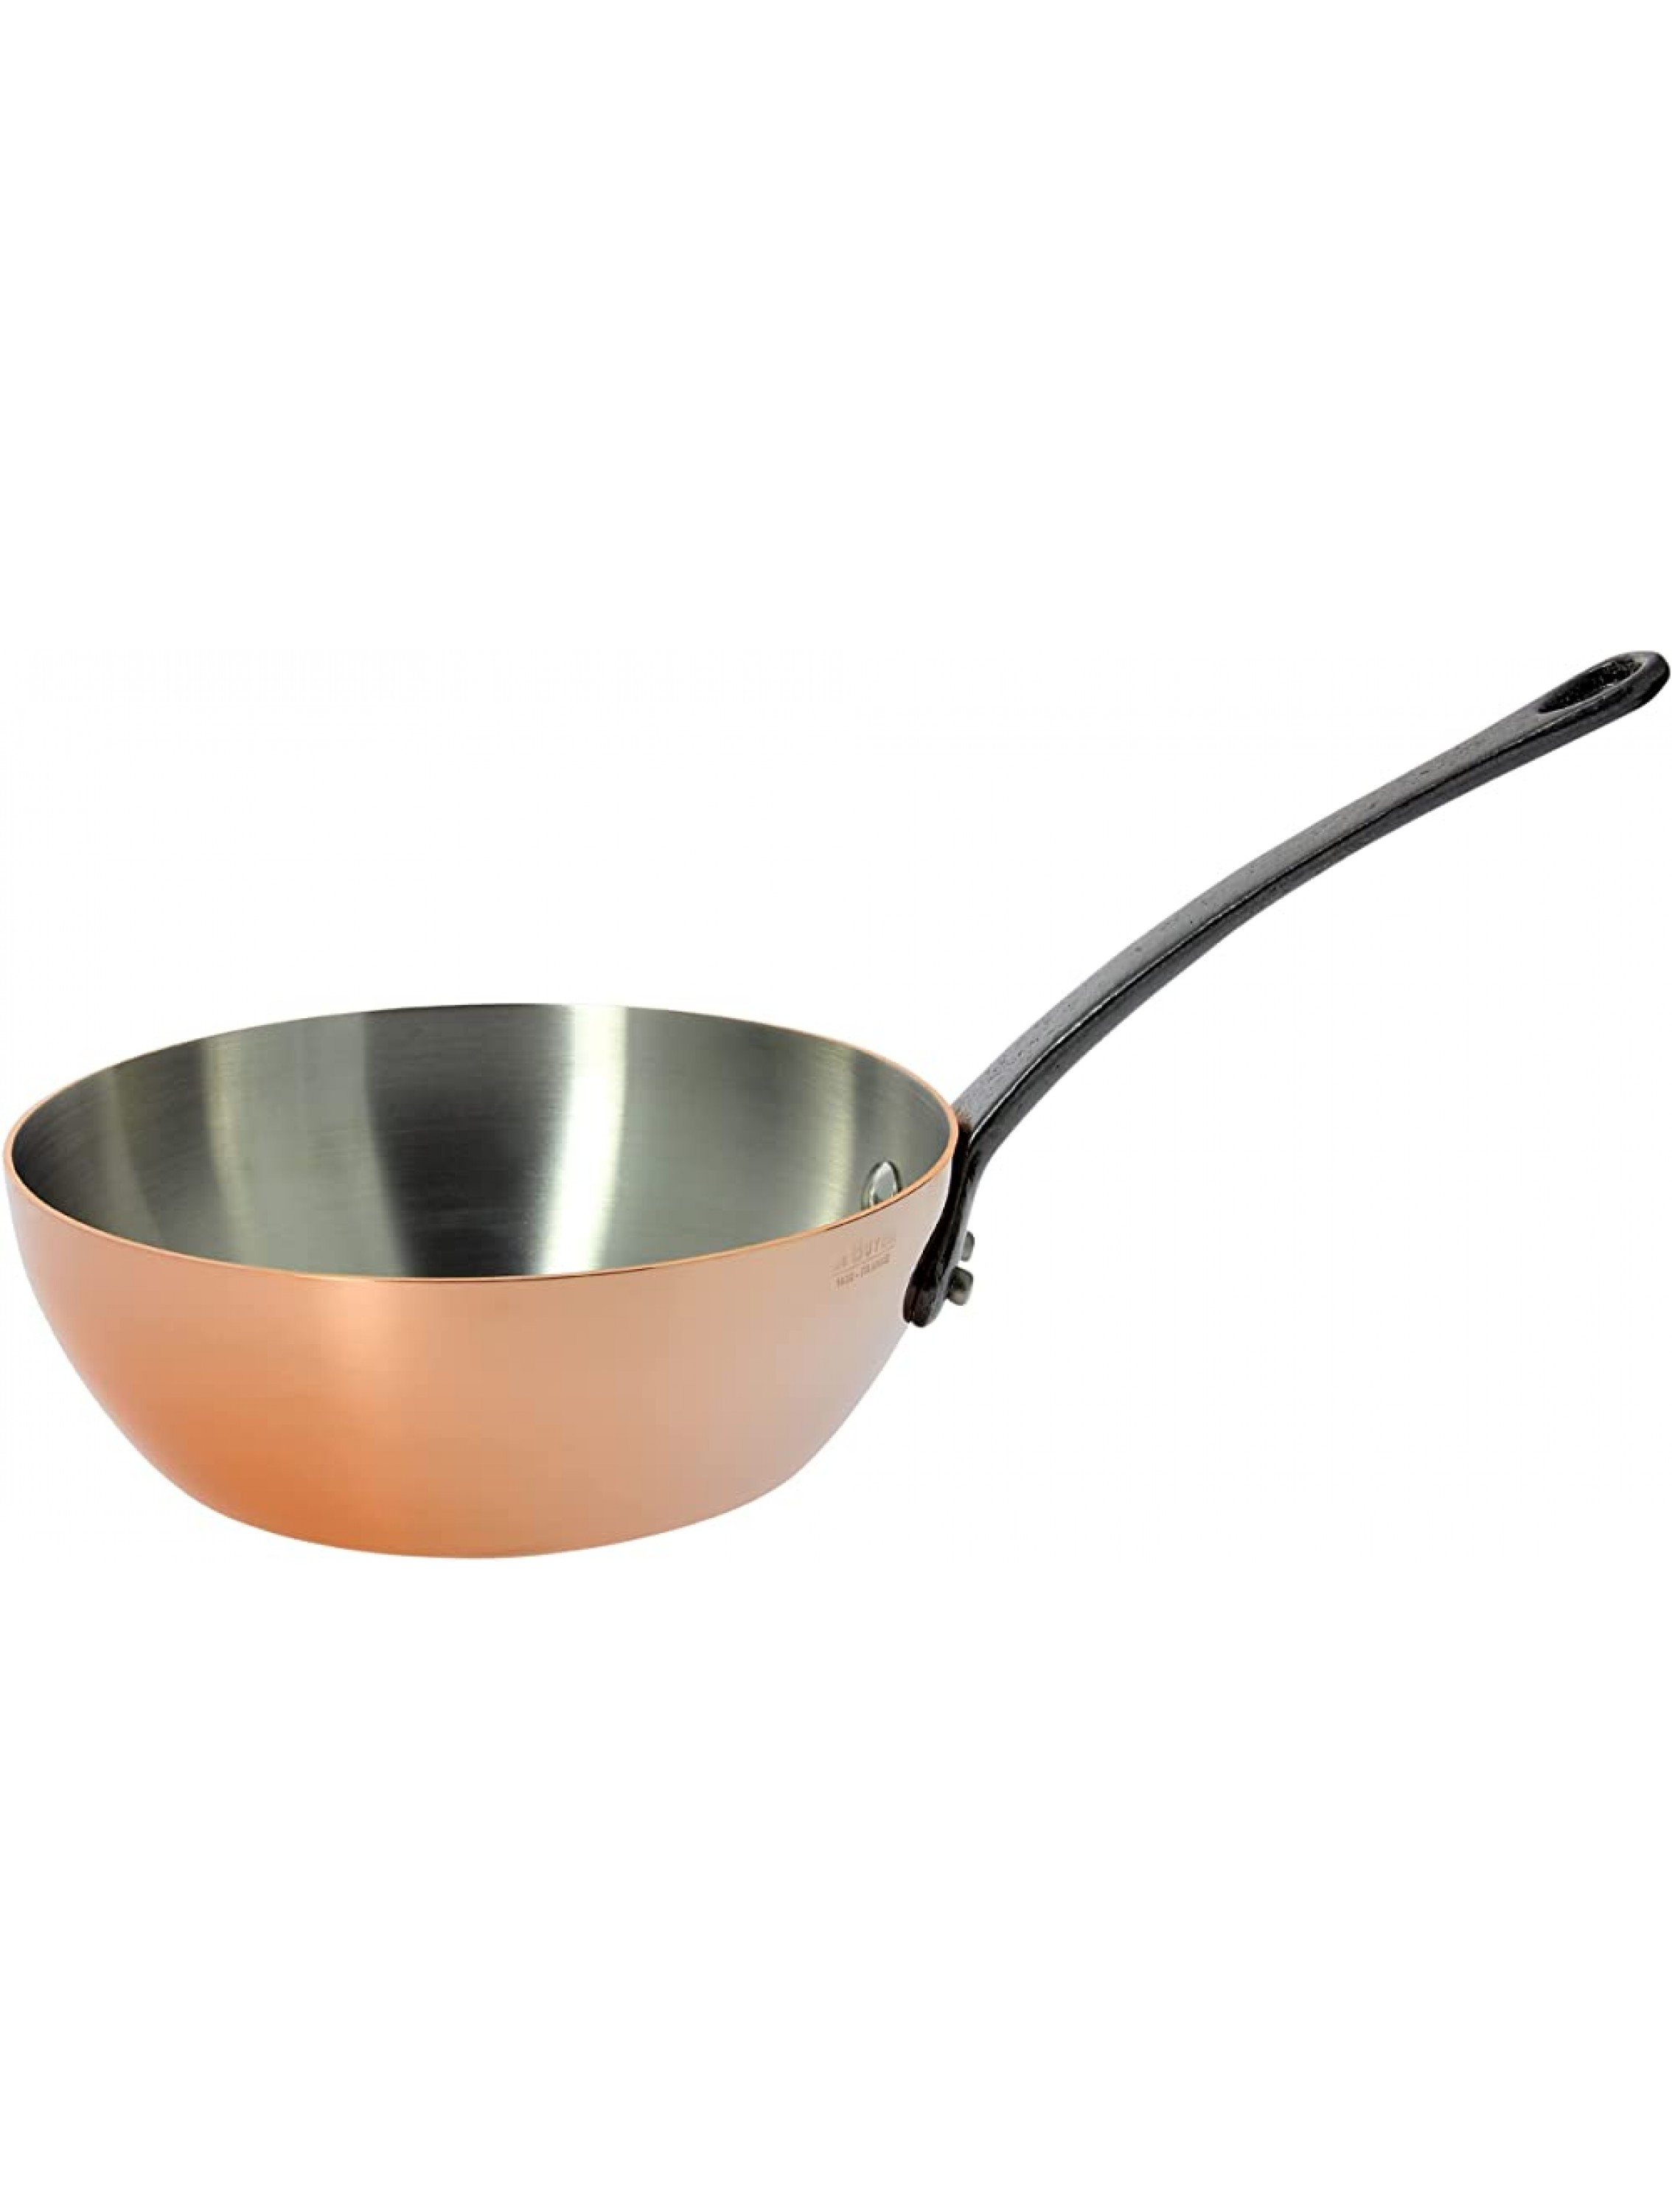 de Buyer Inocuivre Tradition Conical Saute Pan with Cast Iron Handle Copper Cookware with Stainless Steel Lining Oven Safe 6.25 - B9E1NL4R9